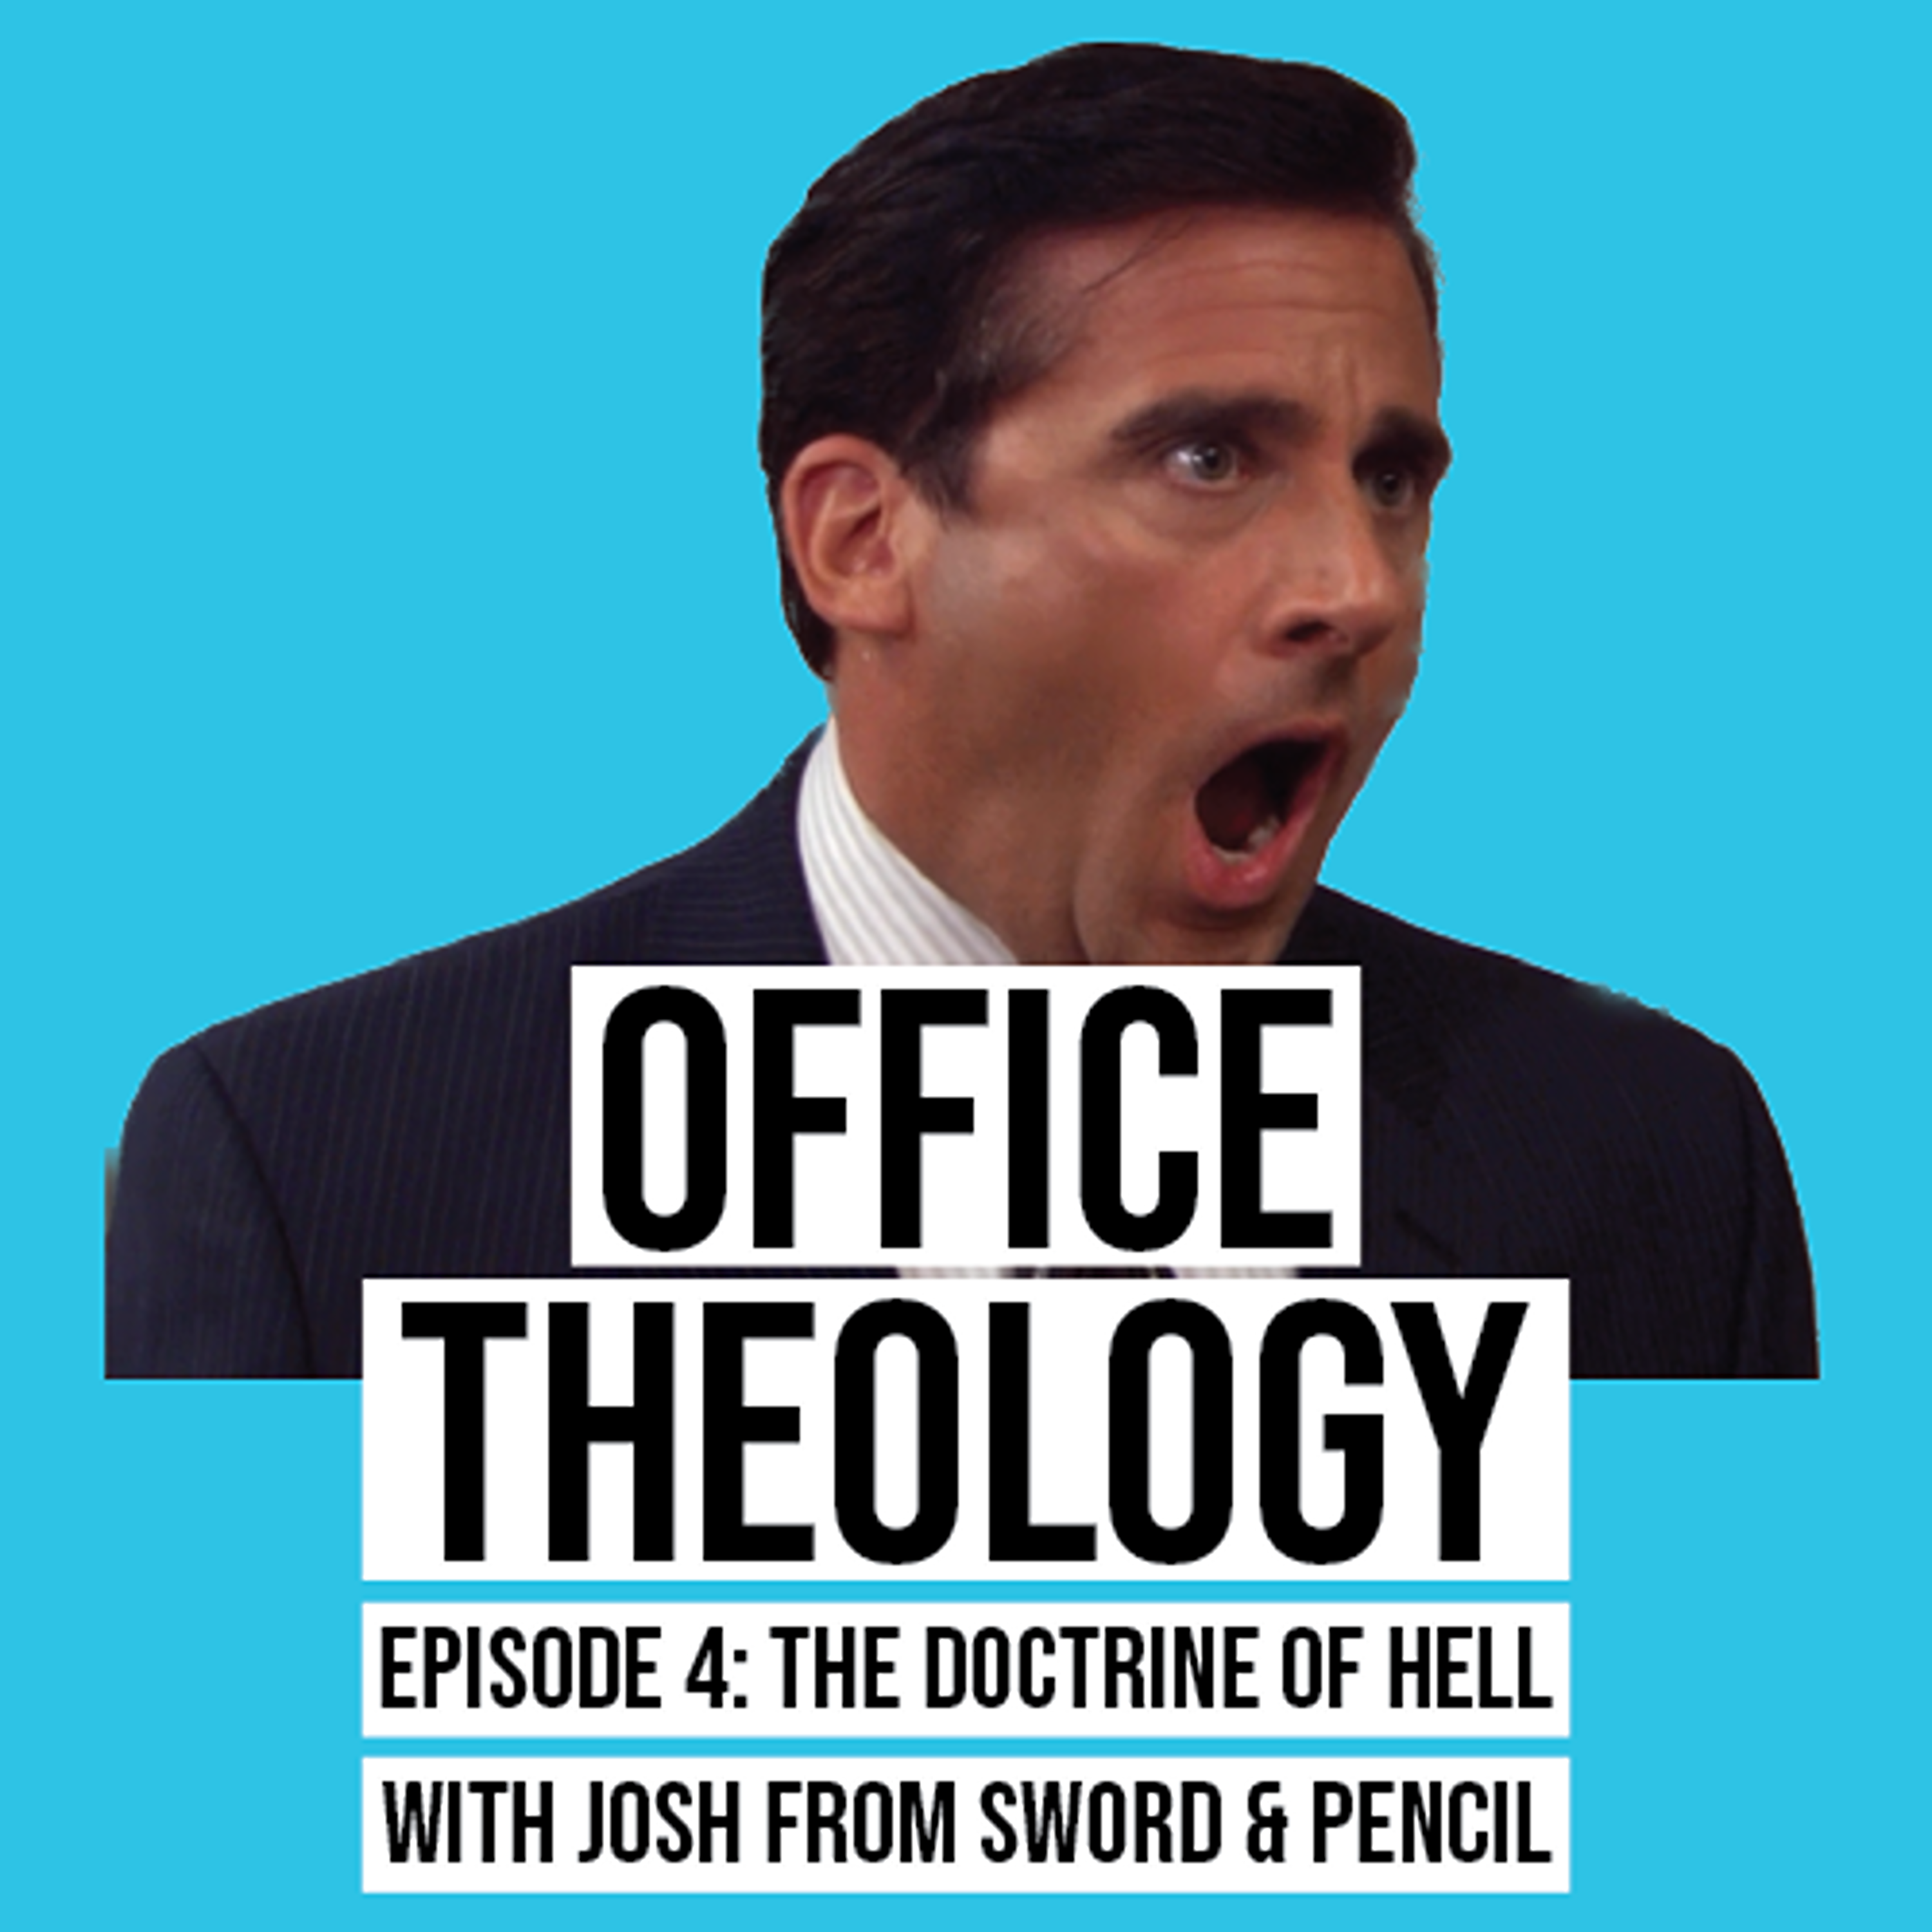 Episode 4: The Doctrine of Hell (Conditionalism) with Josh from Sword & Pencil